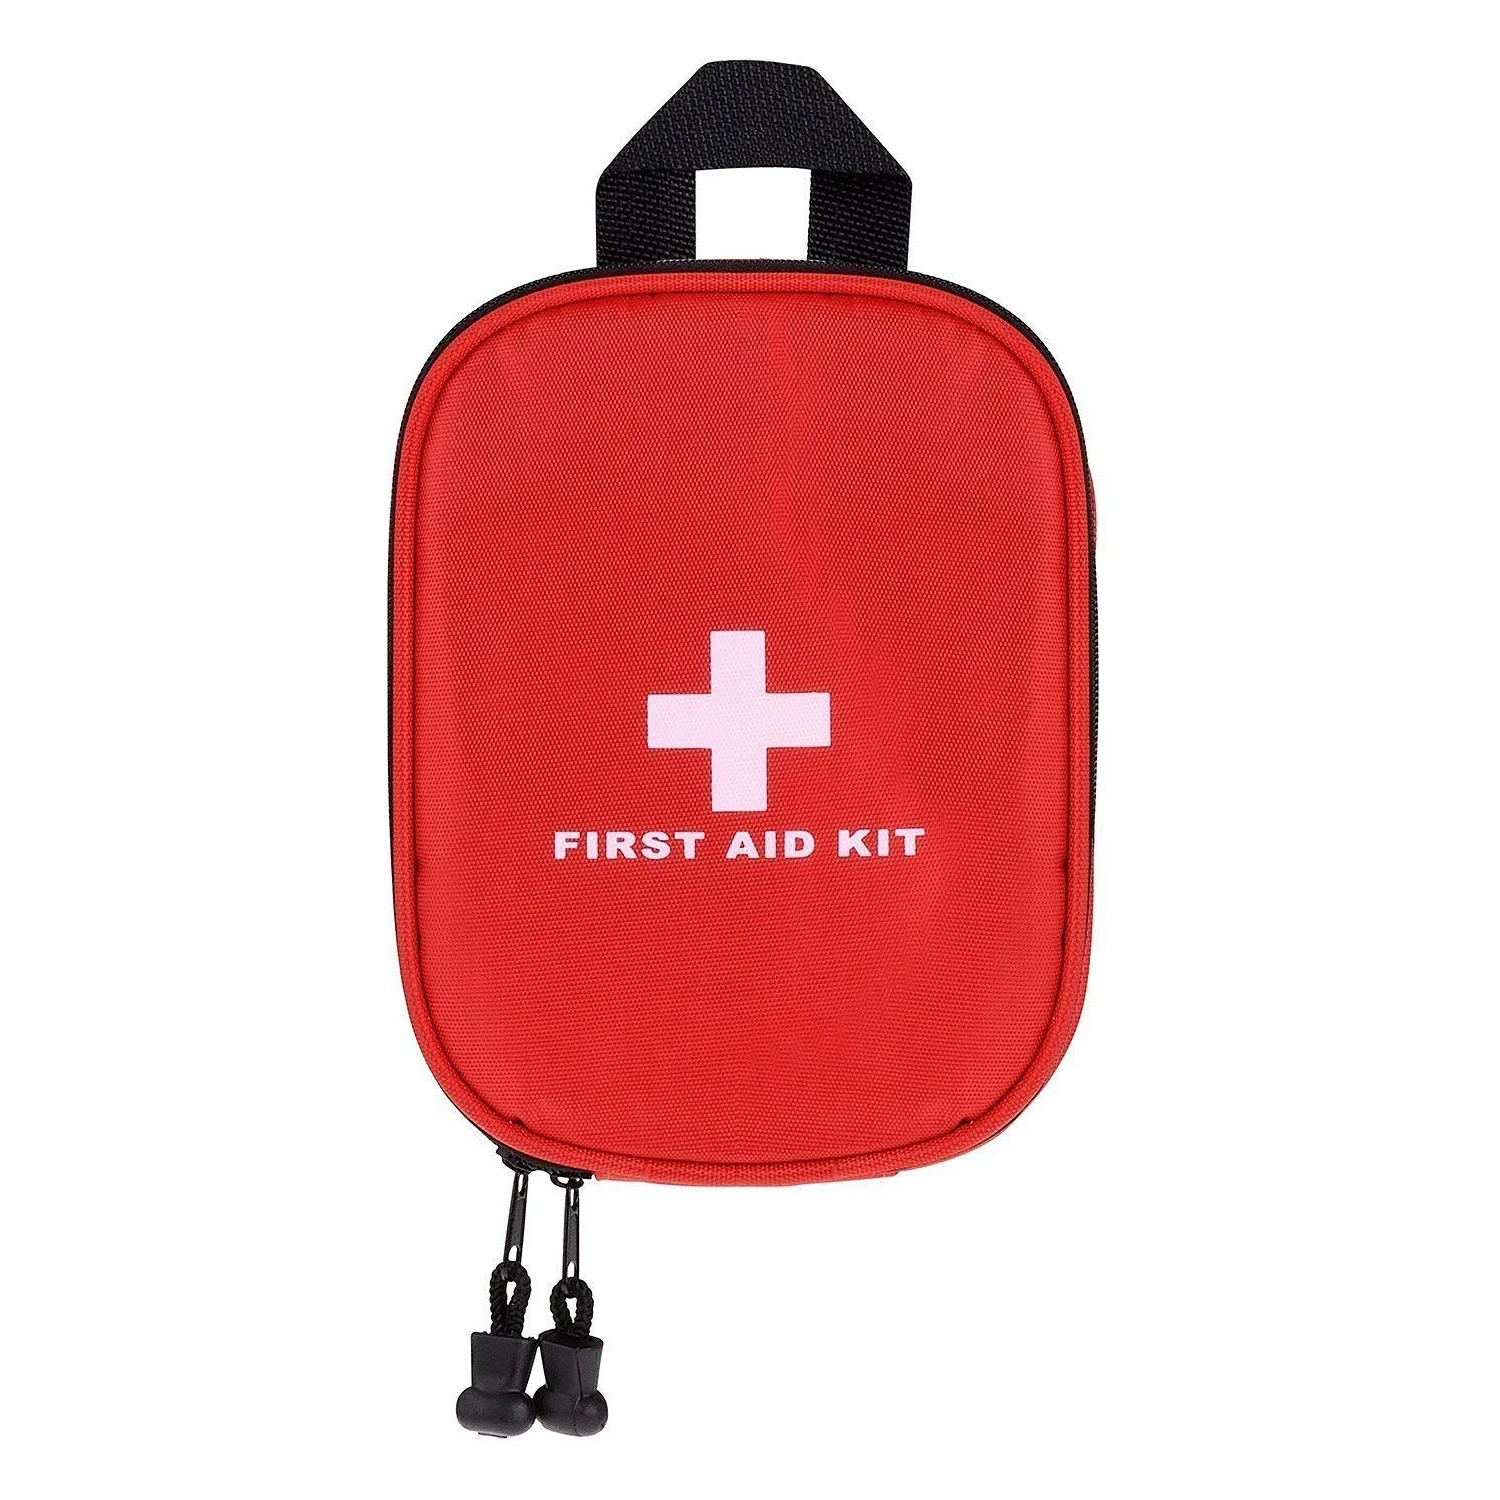 New-First Aid Kit- Medical Emergency Kit Waterproof Portable Essential Injuries For Car Kitchen Camping Travel Office Sports A |